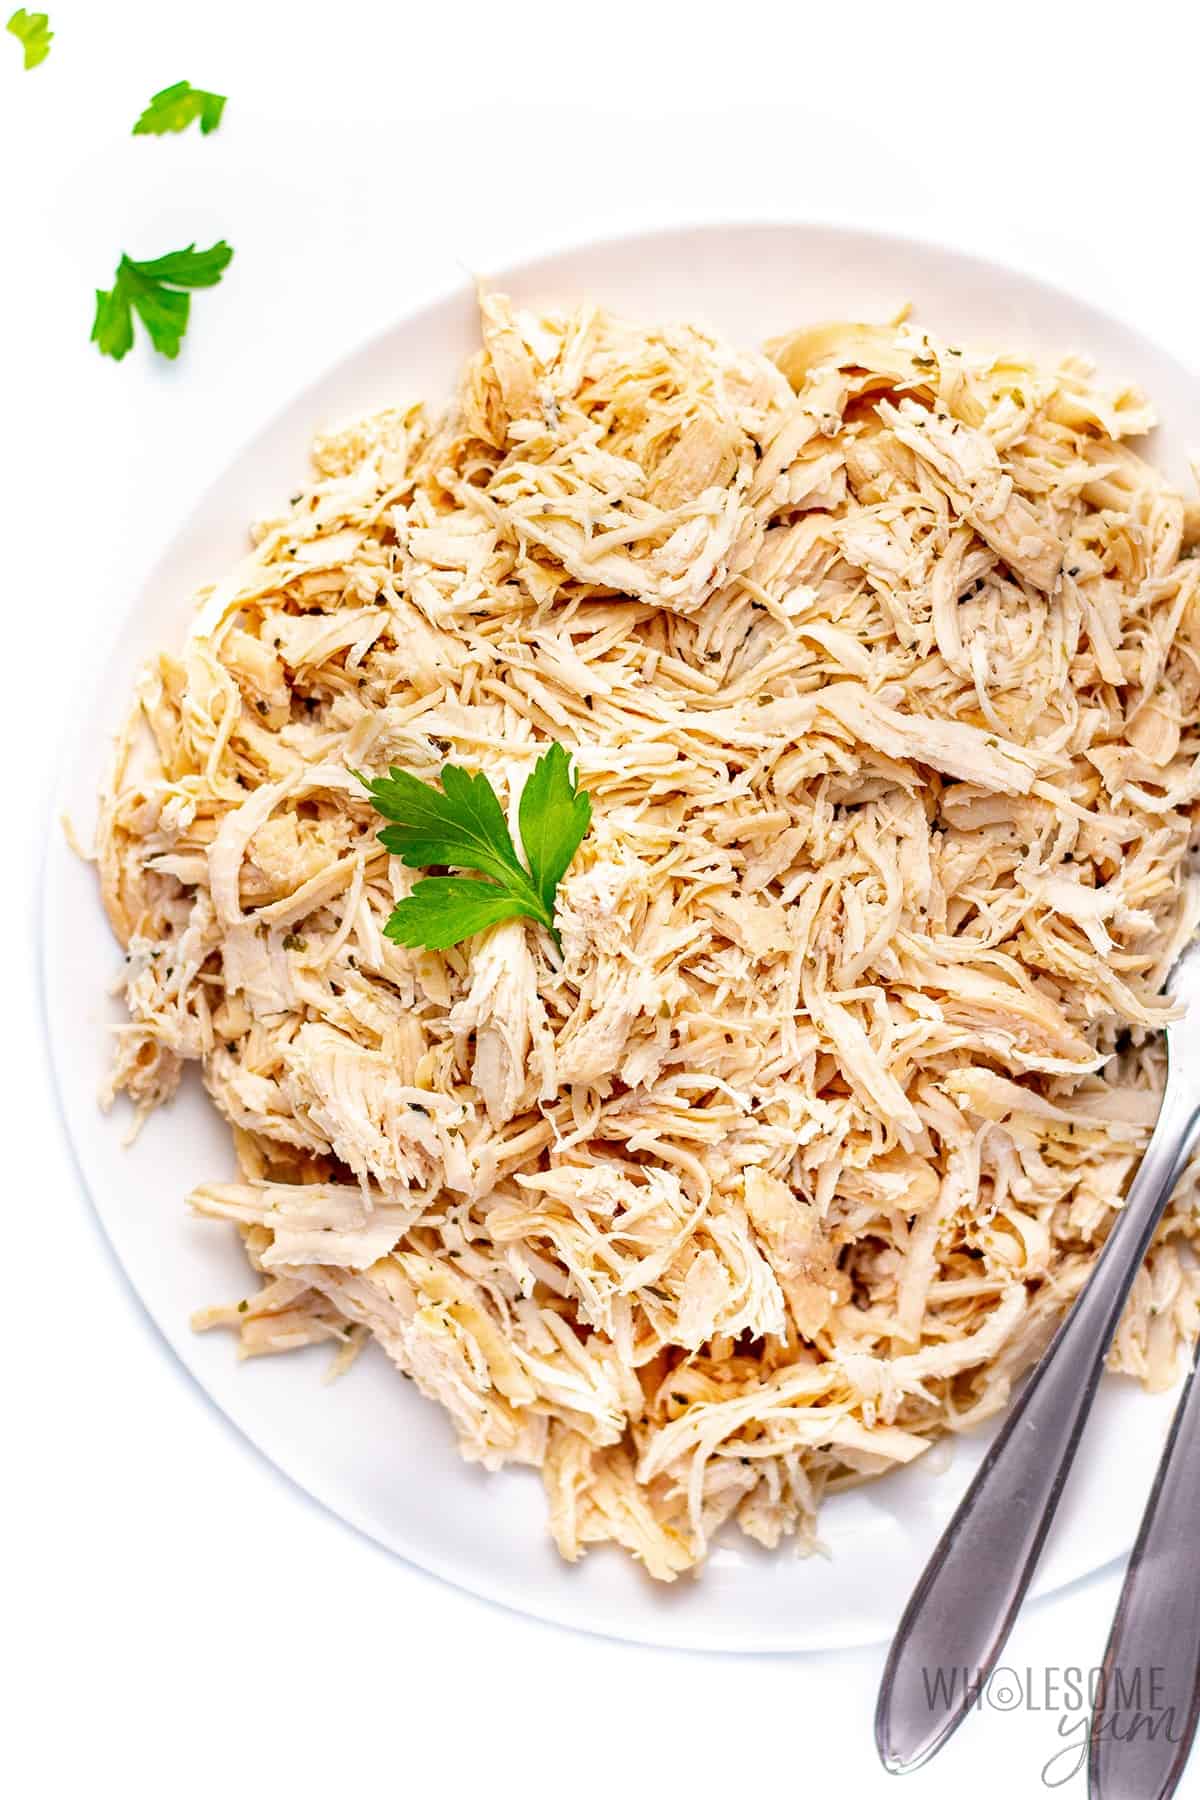 Shredded chicken breast on a plate.